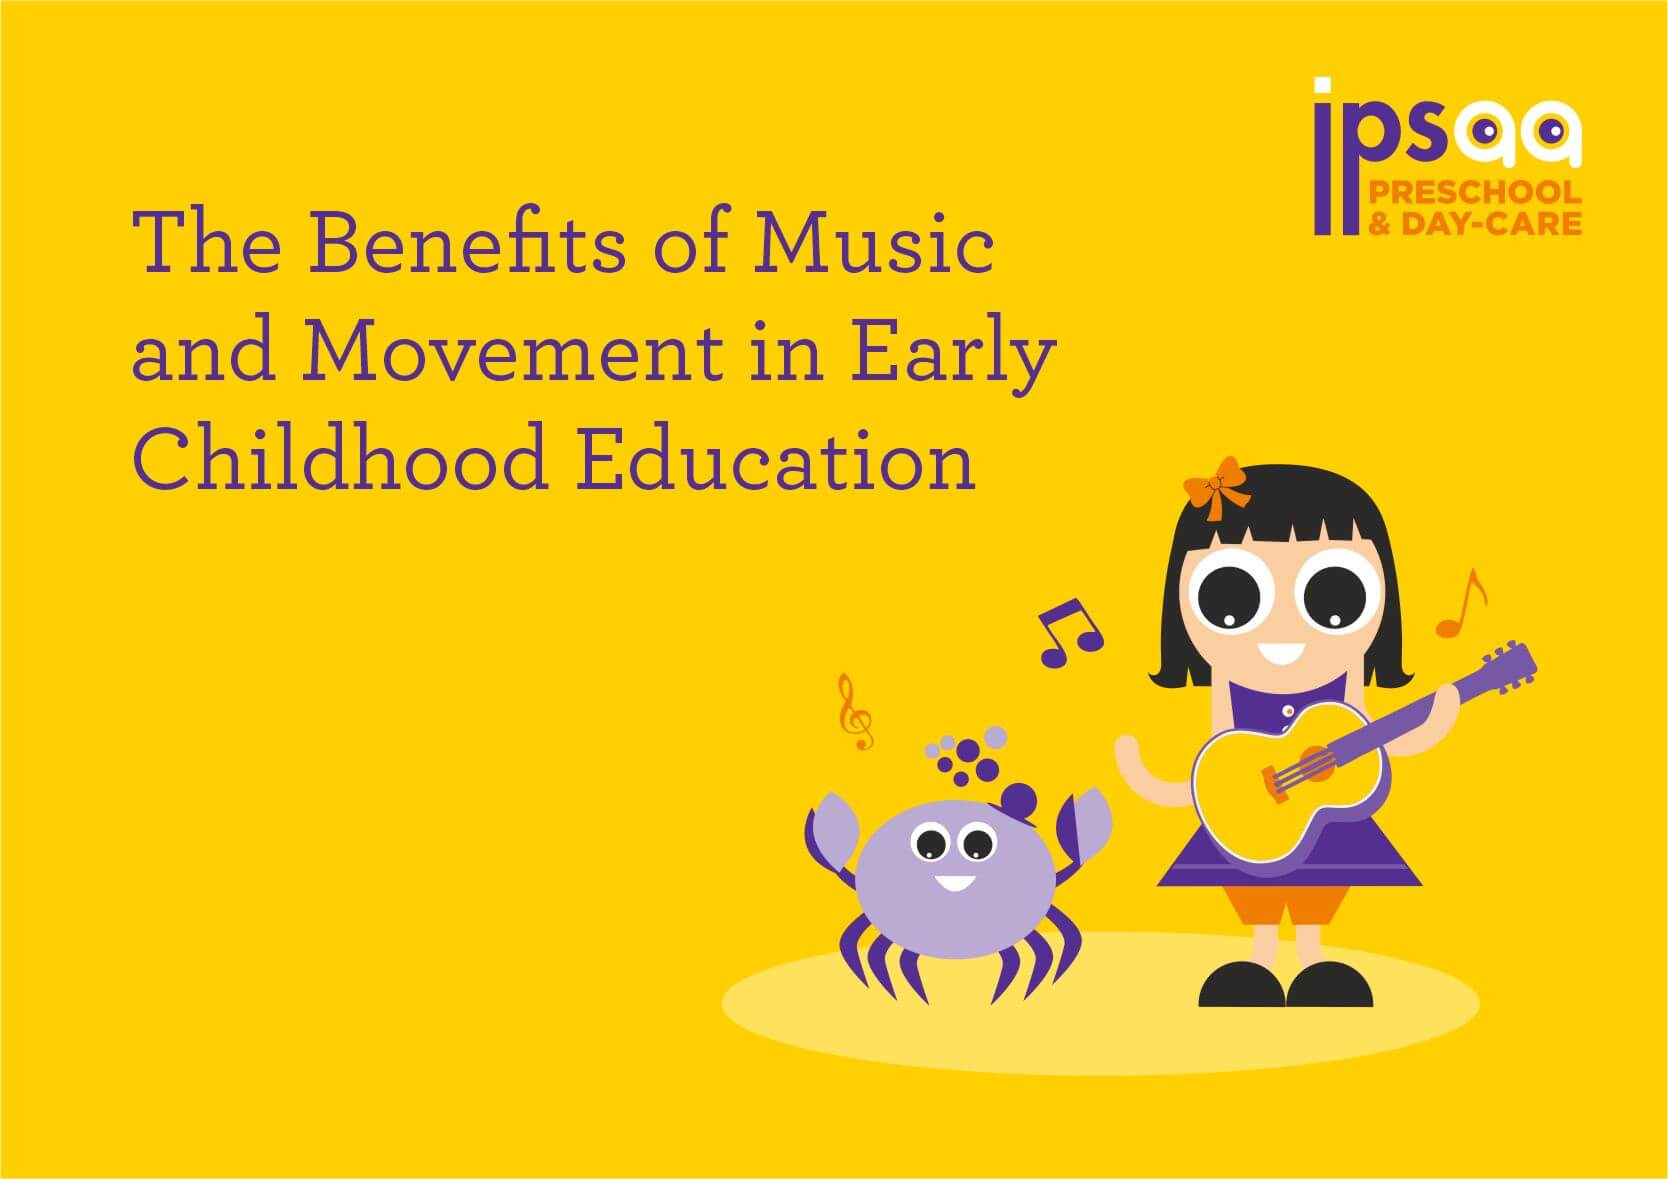 The Benefits of Music and Movement in Early Childhood Education